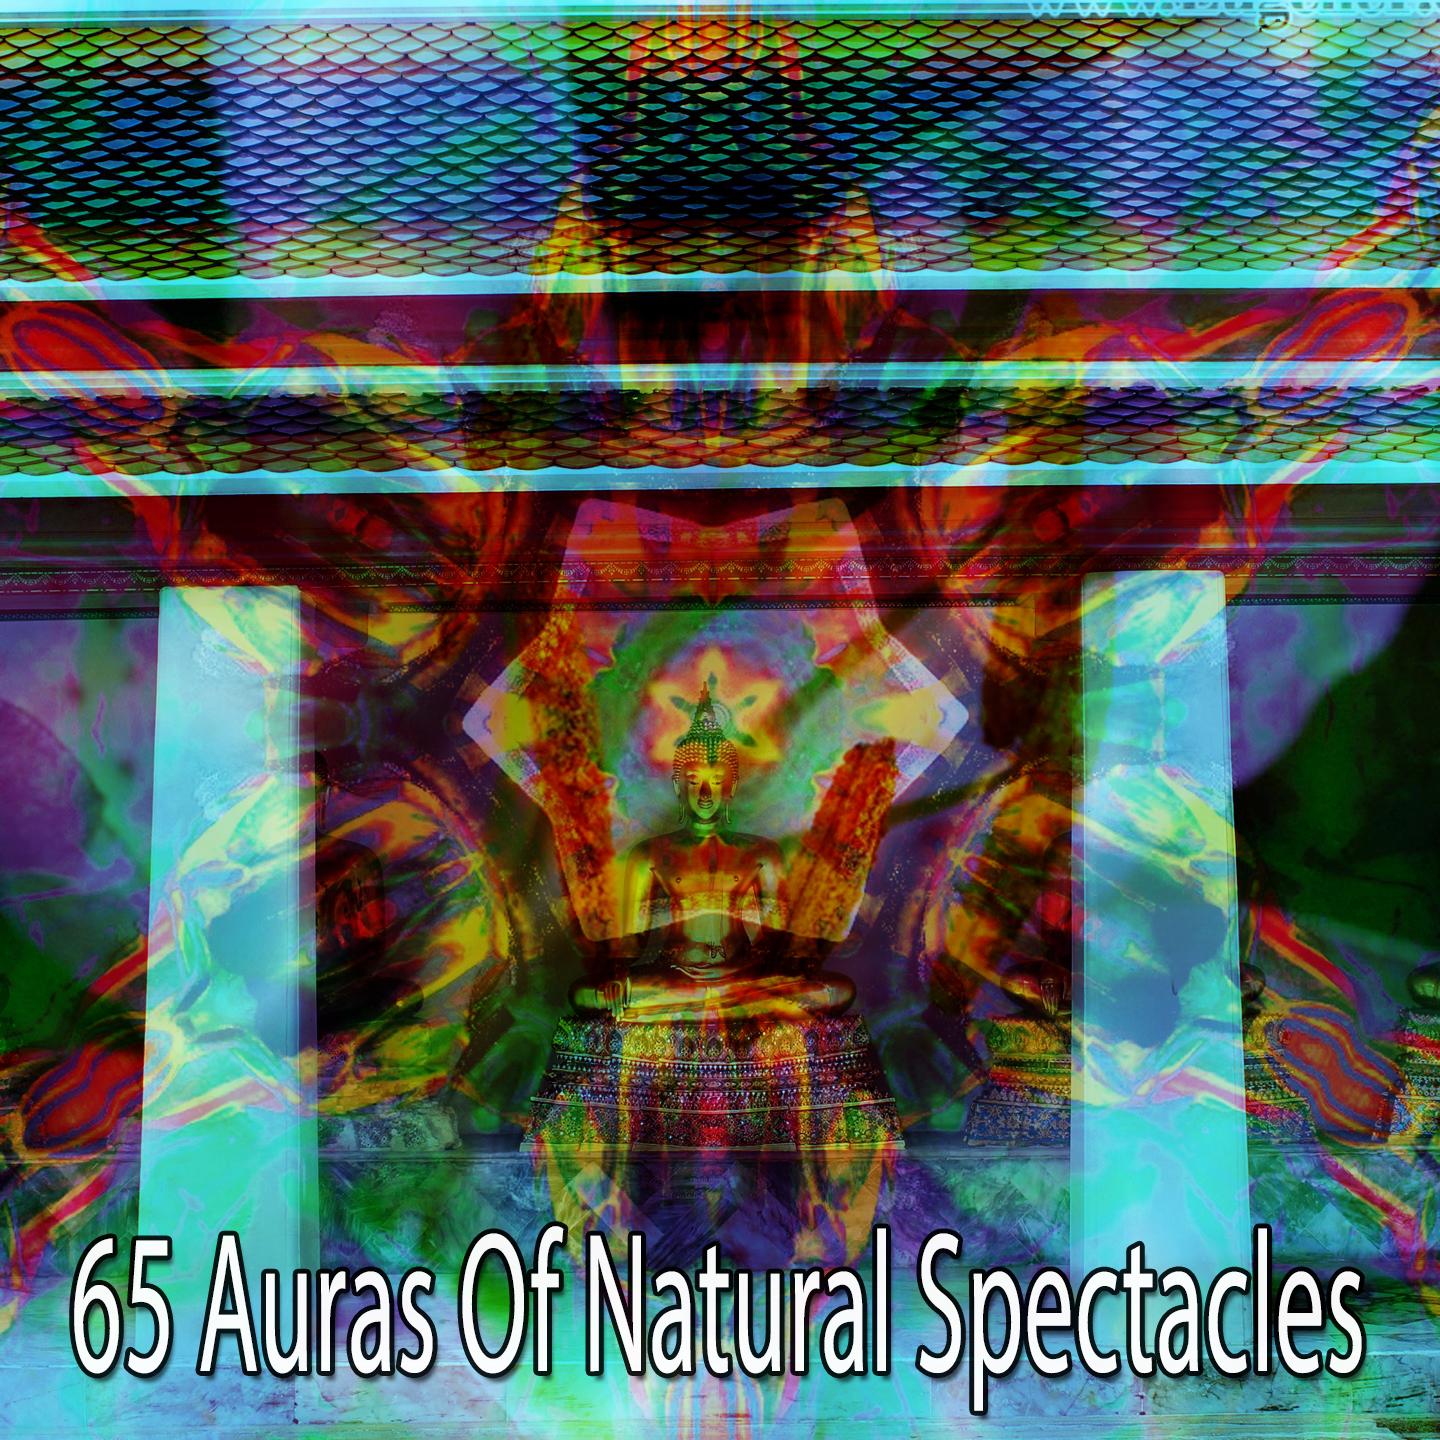 65 Auras of Natural Spectacles